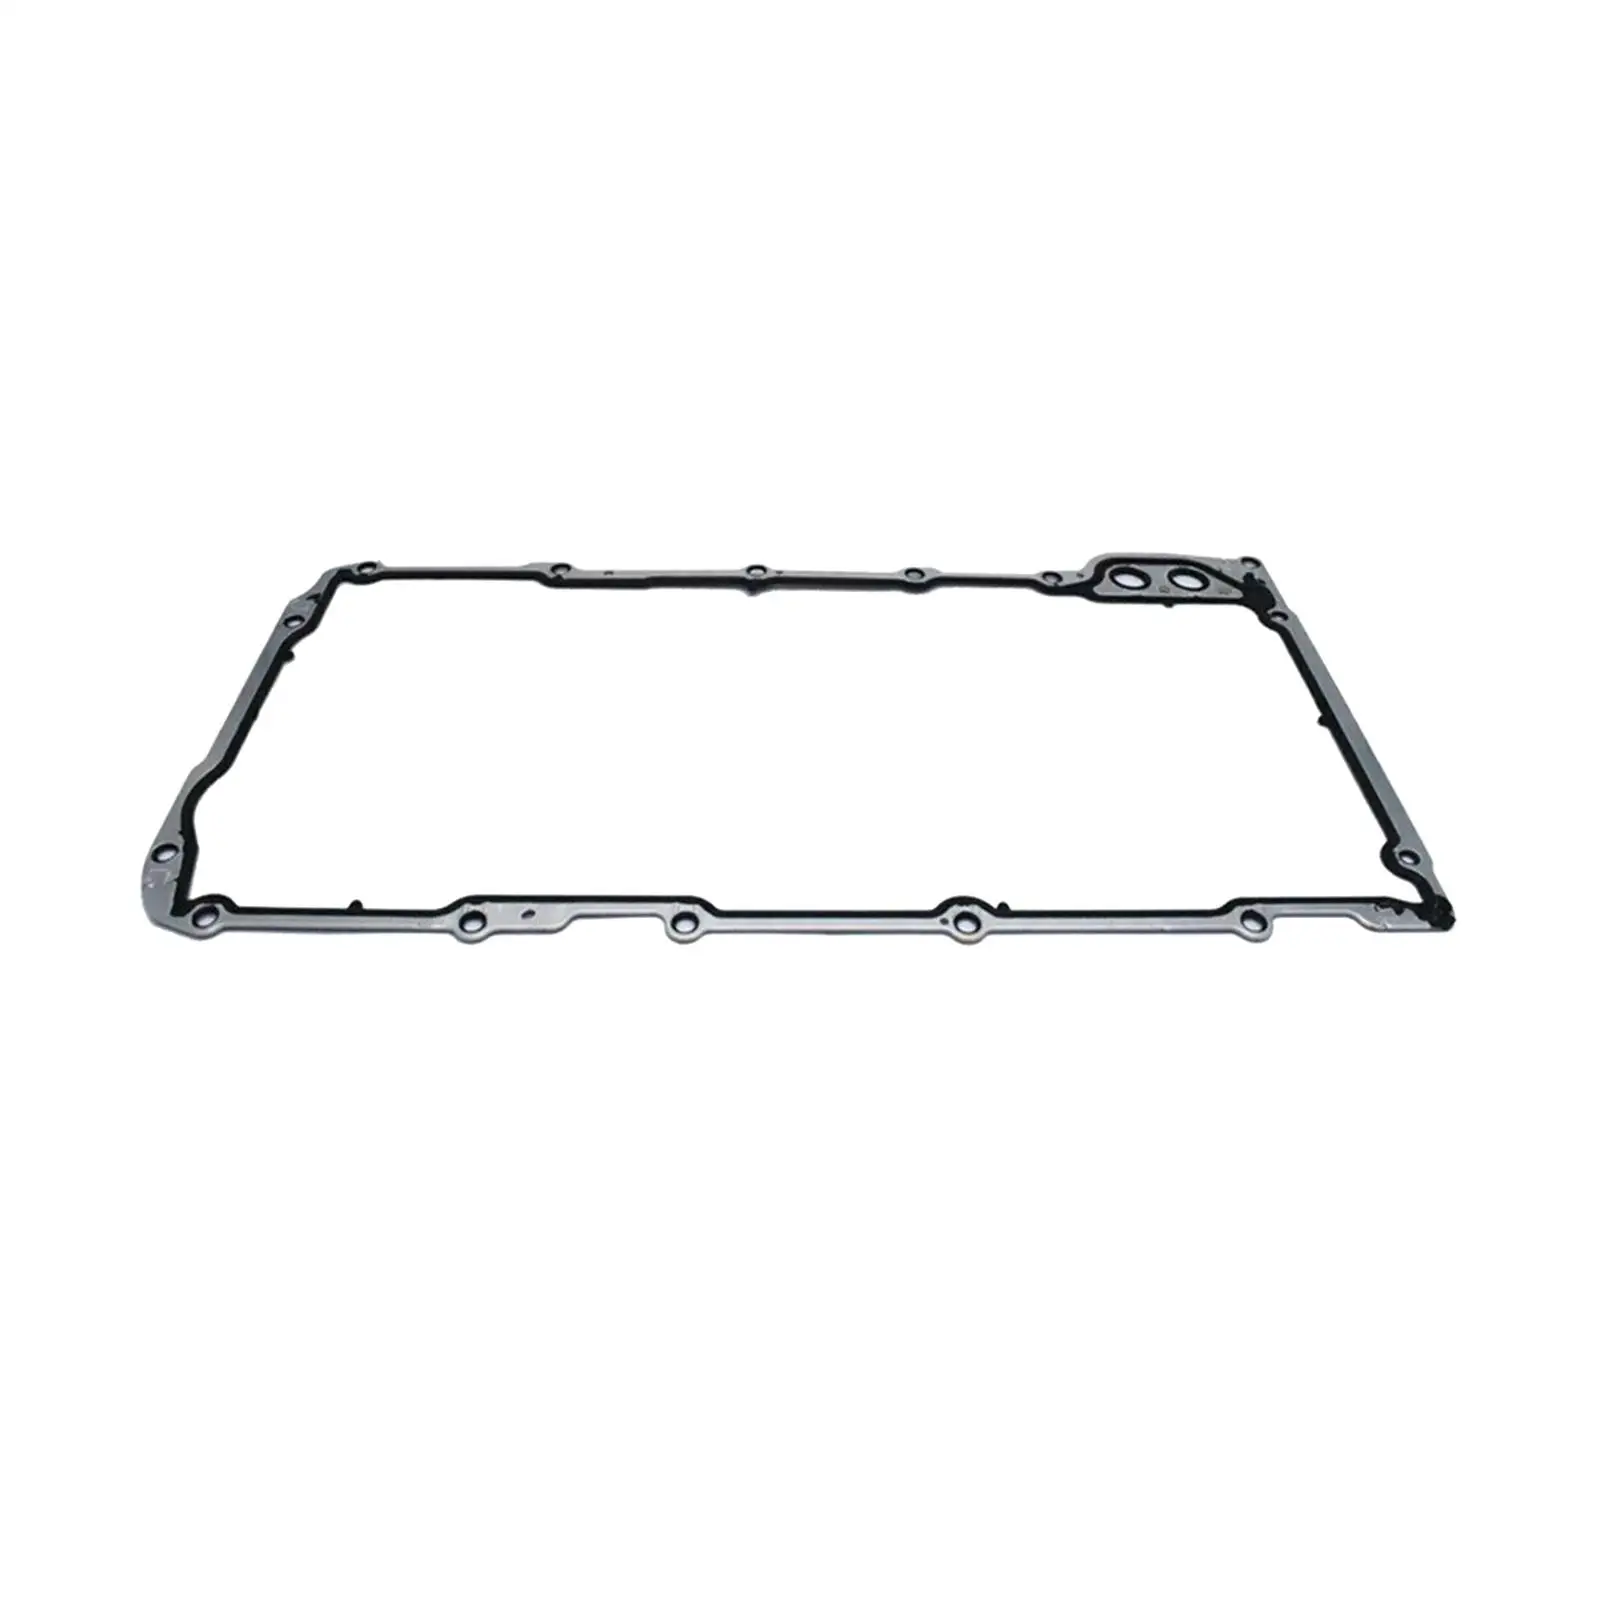 Engine Oil Pan Gasket 12612350 for Hummer Easy to Install Durable